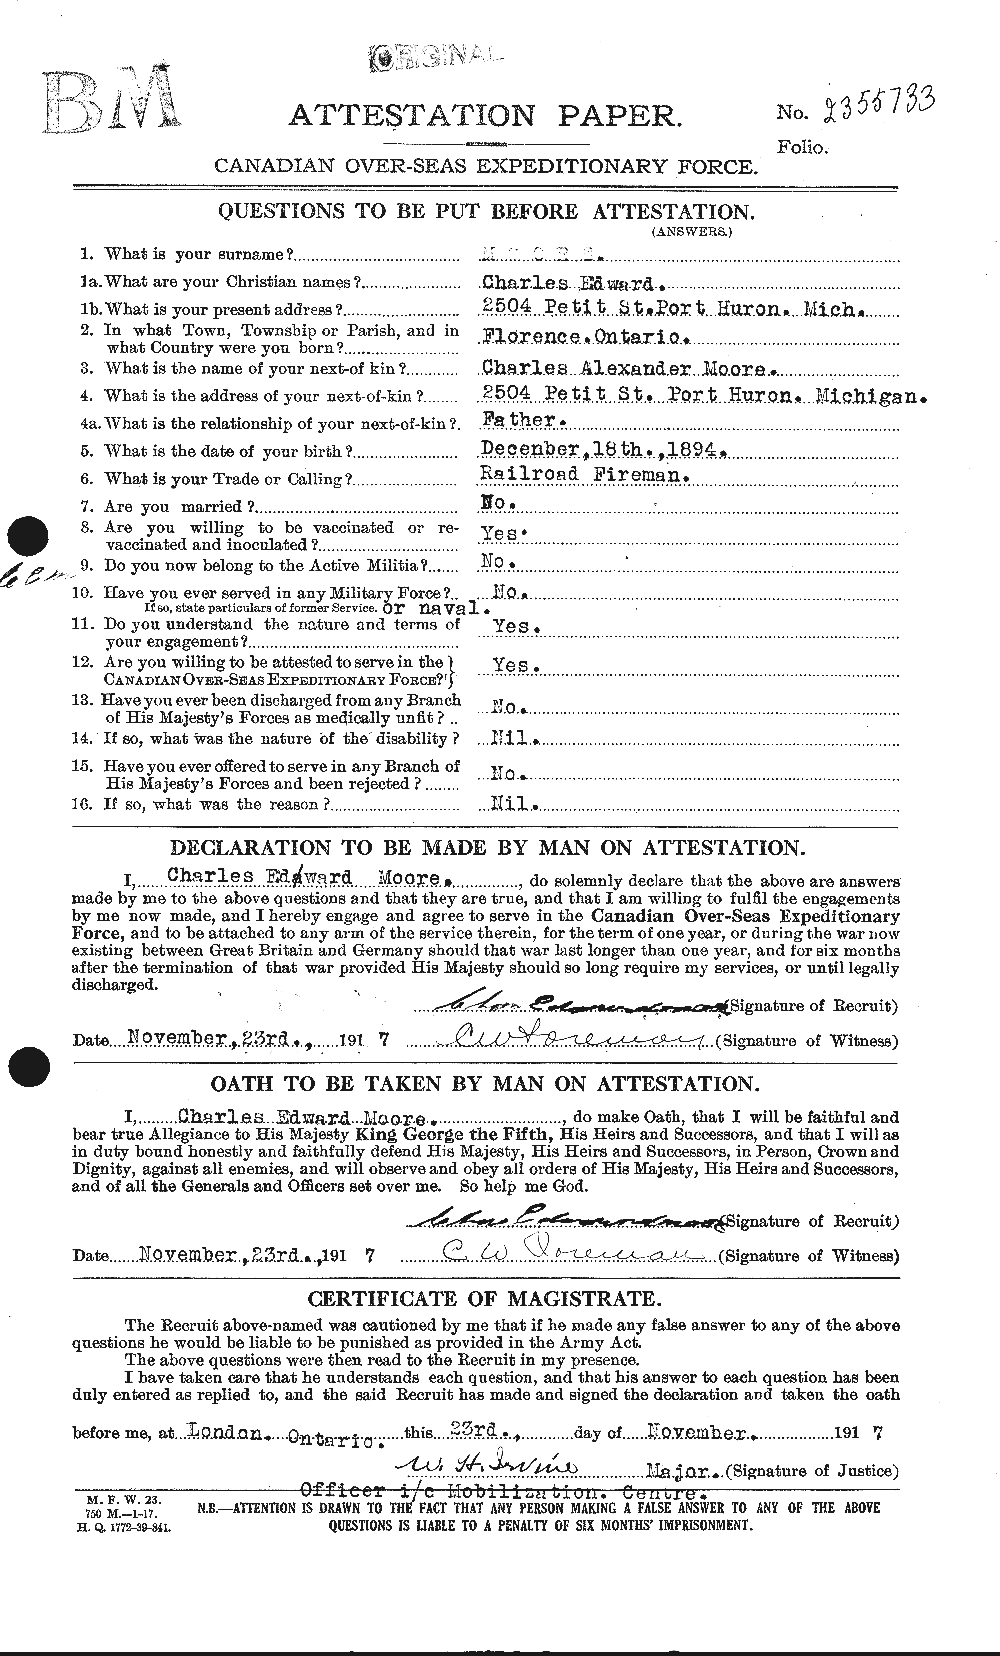 Personnel Records of the First World War - CEF 506504a